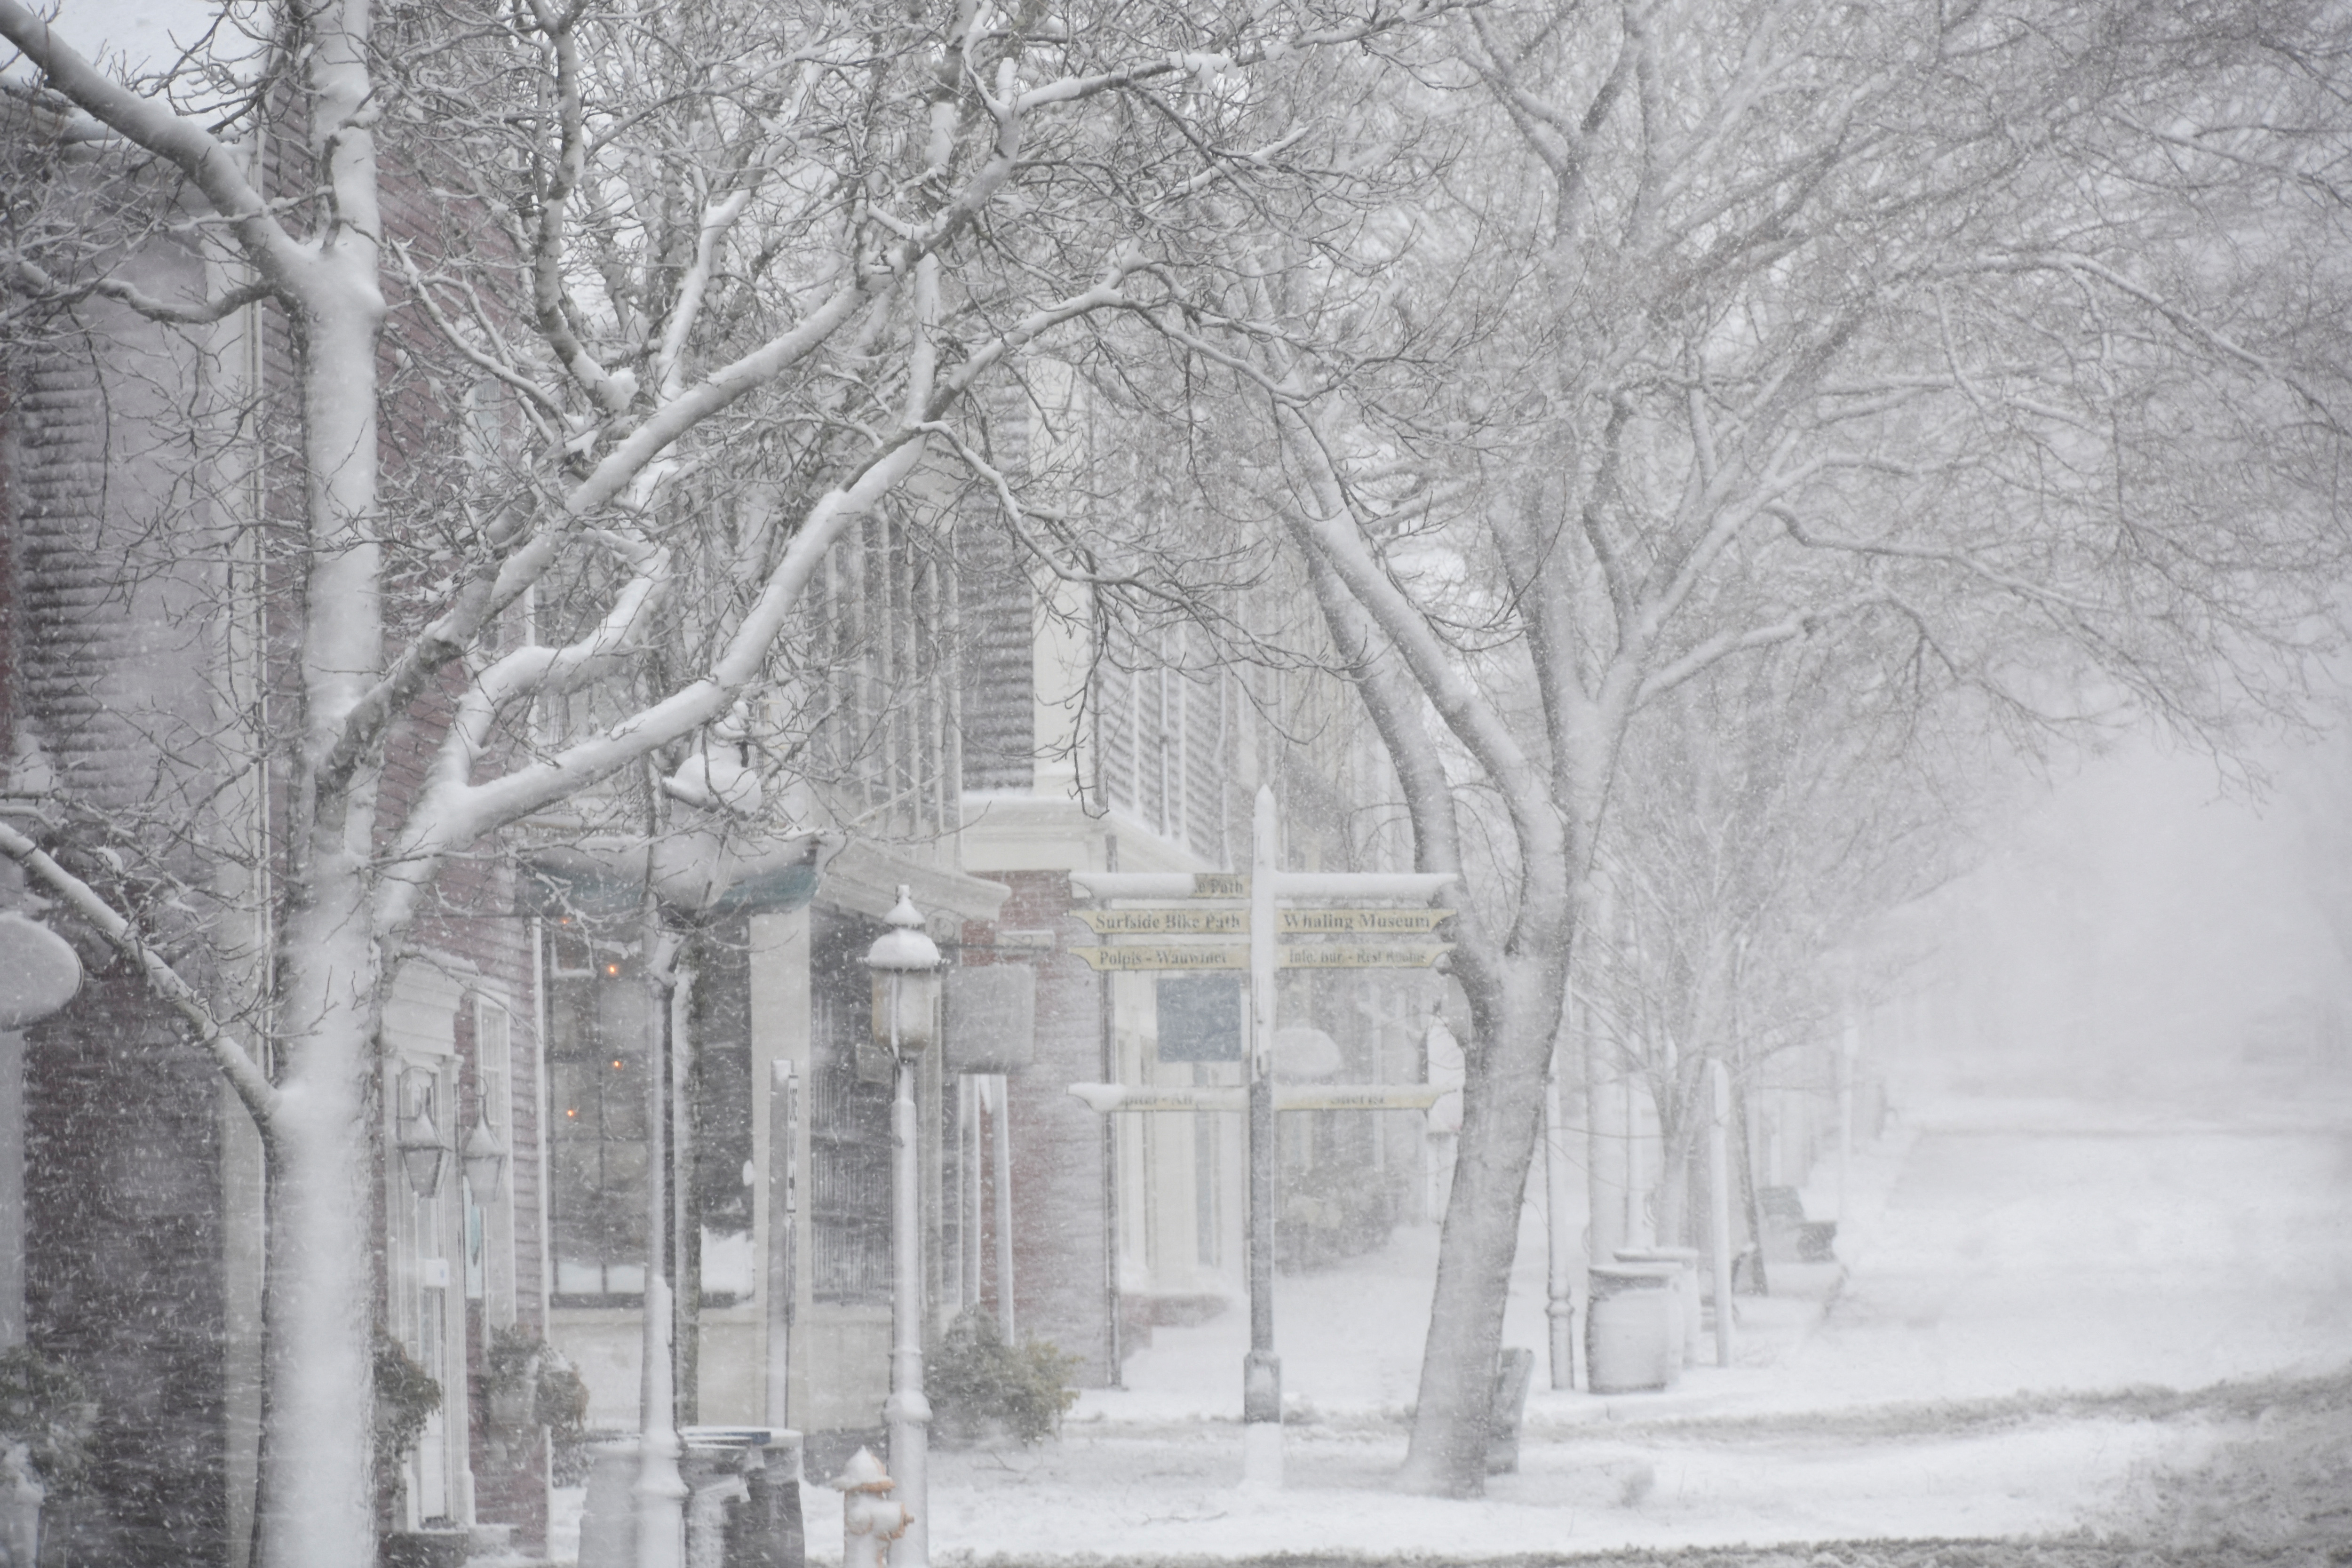 A view of buildings and a street covered in snow in Nantucket